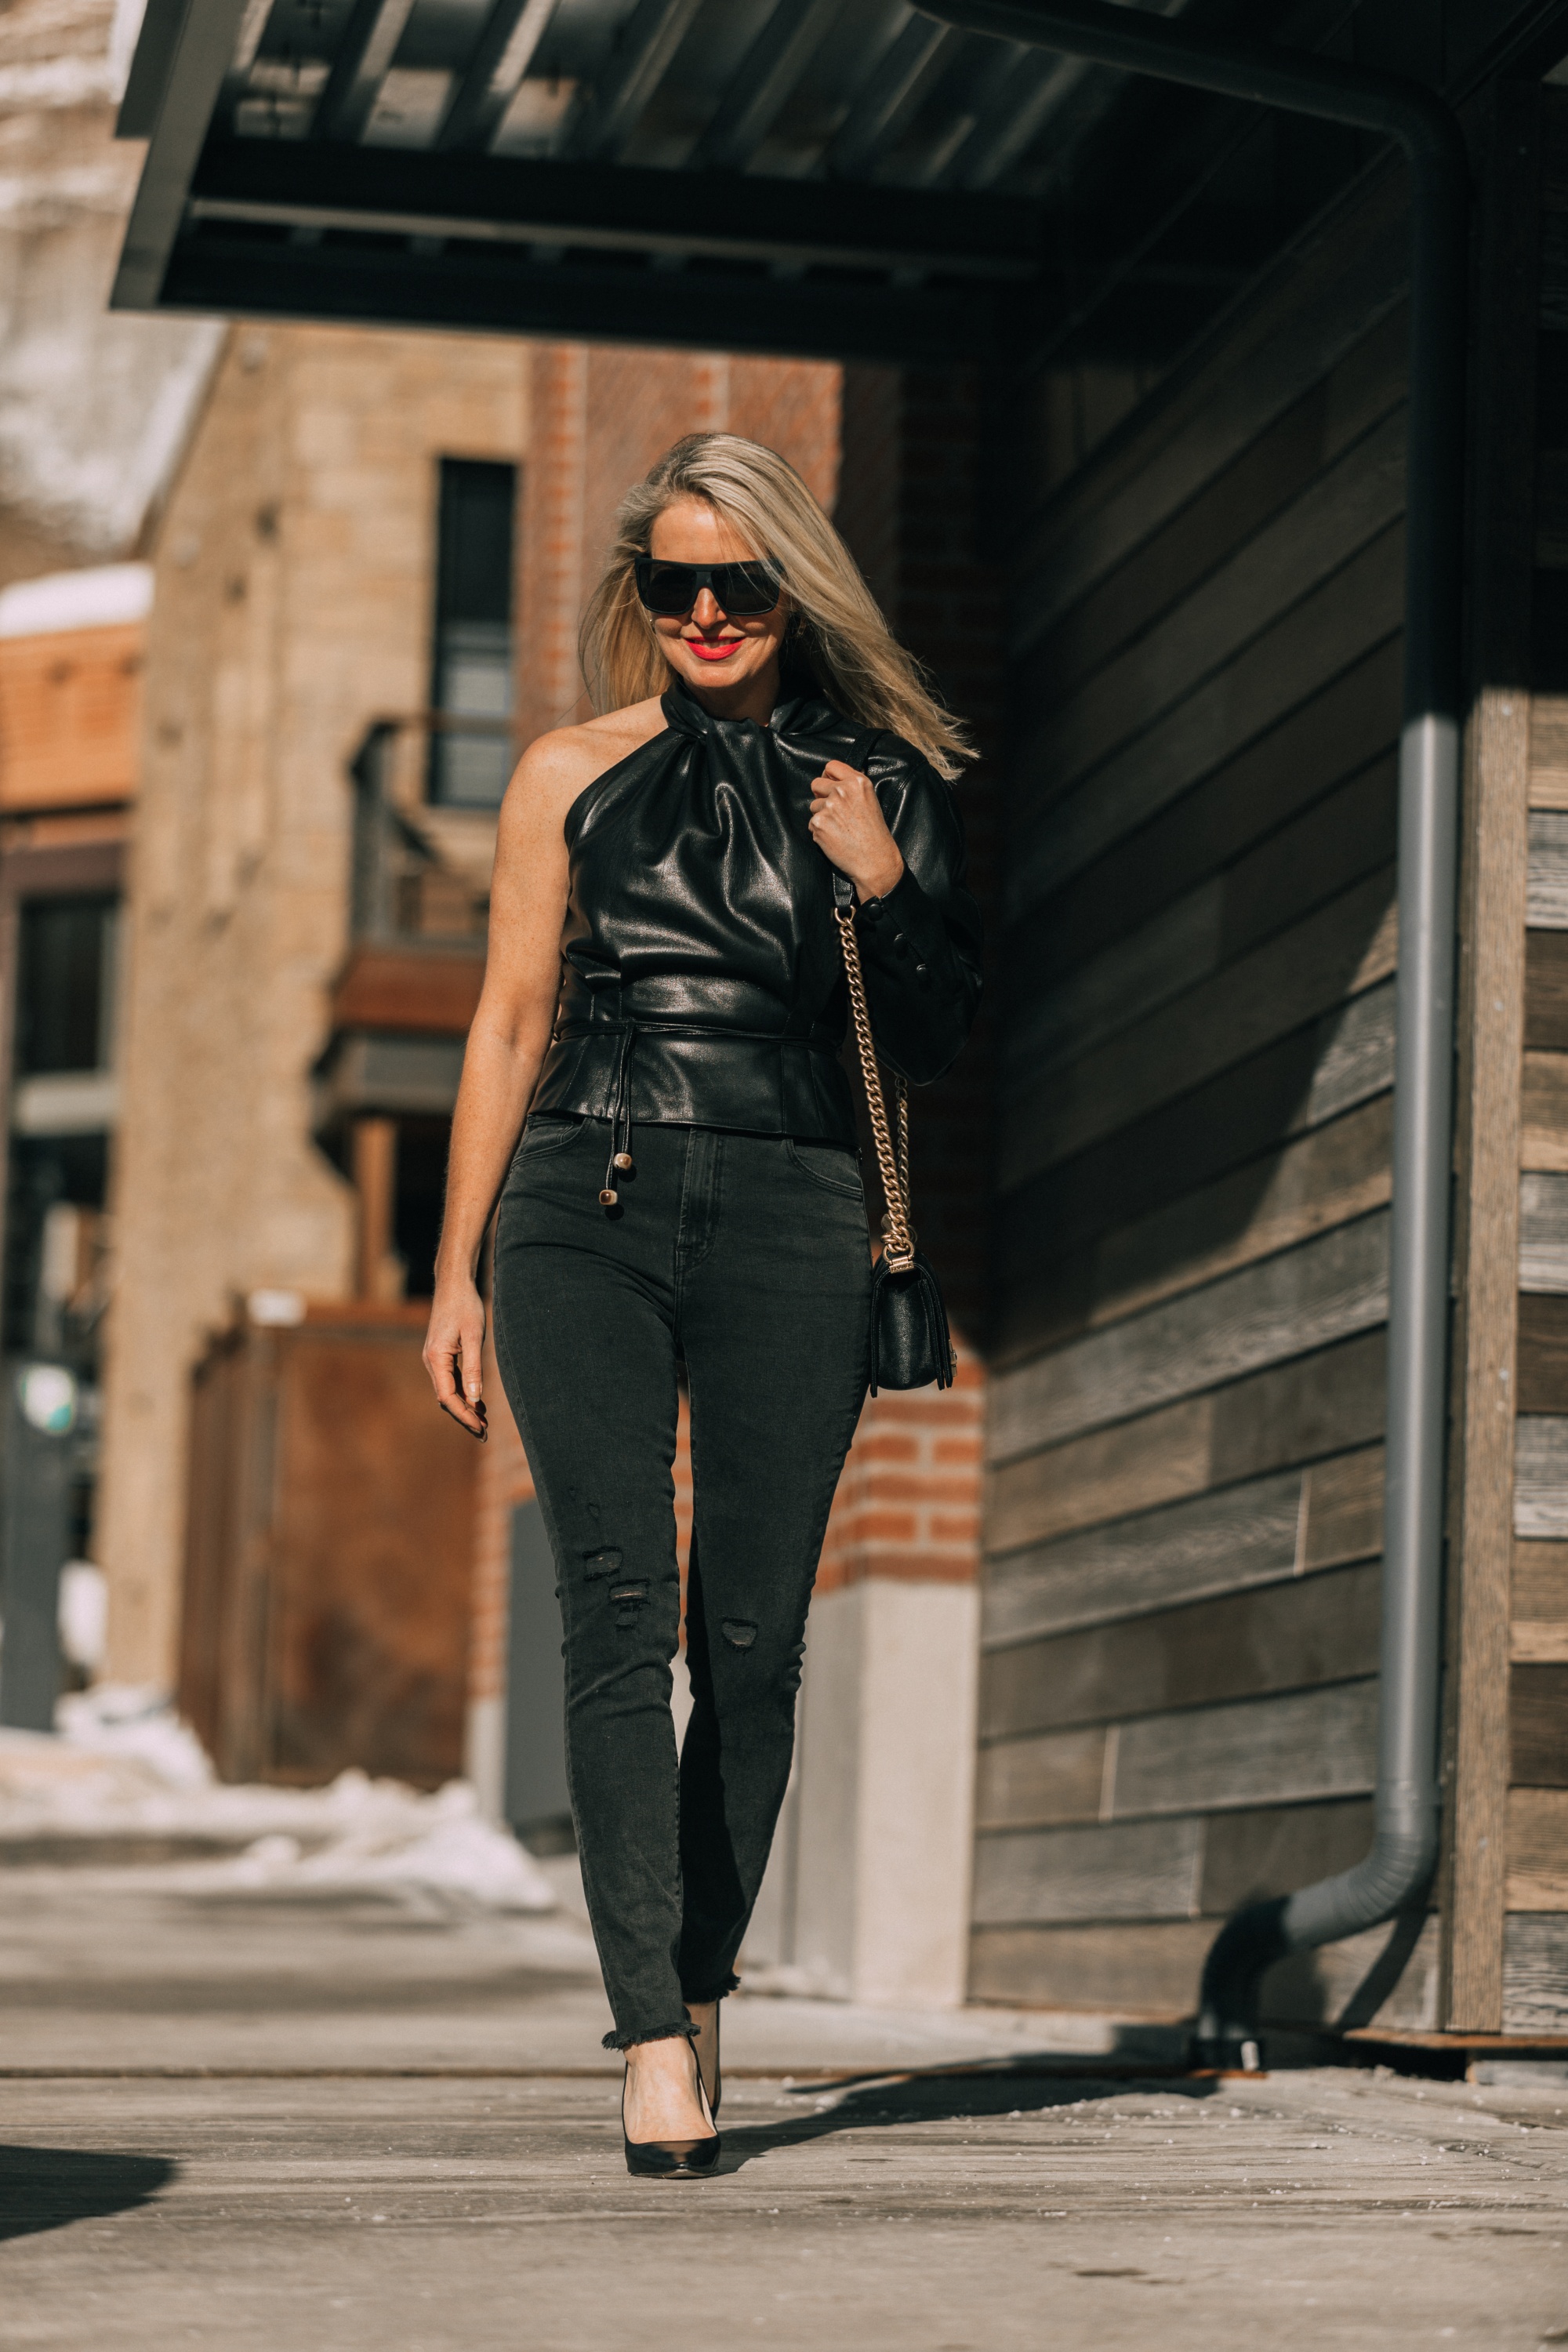 Date Night Outfits, Fashion blogger Erin Busbee of BusbeeStyle.com wearing black minimally distressed jeans, Jimmy Choo pumps, and faux leather one shoulder top by Nanushka in Telluride, Colorado